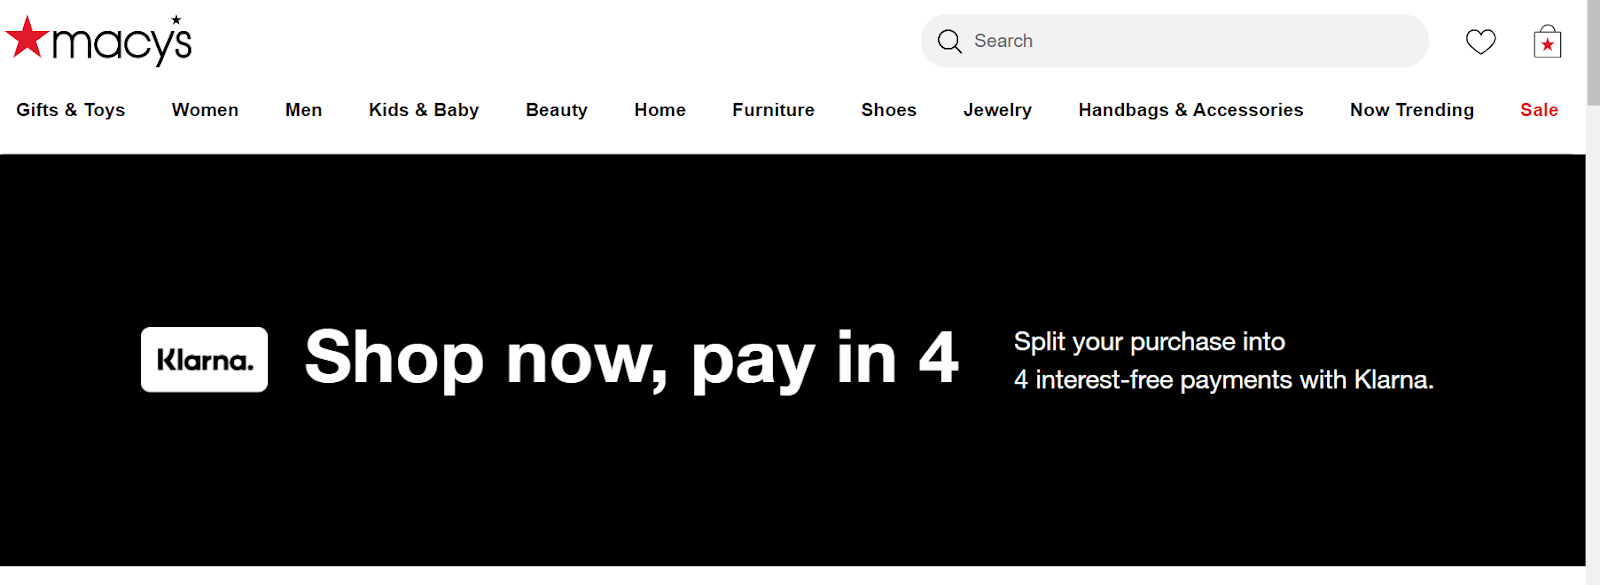 Macy's shop now  pay in 4 with Klarna